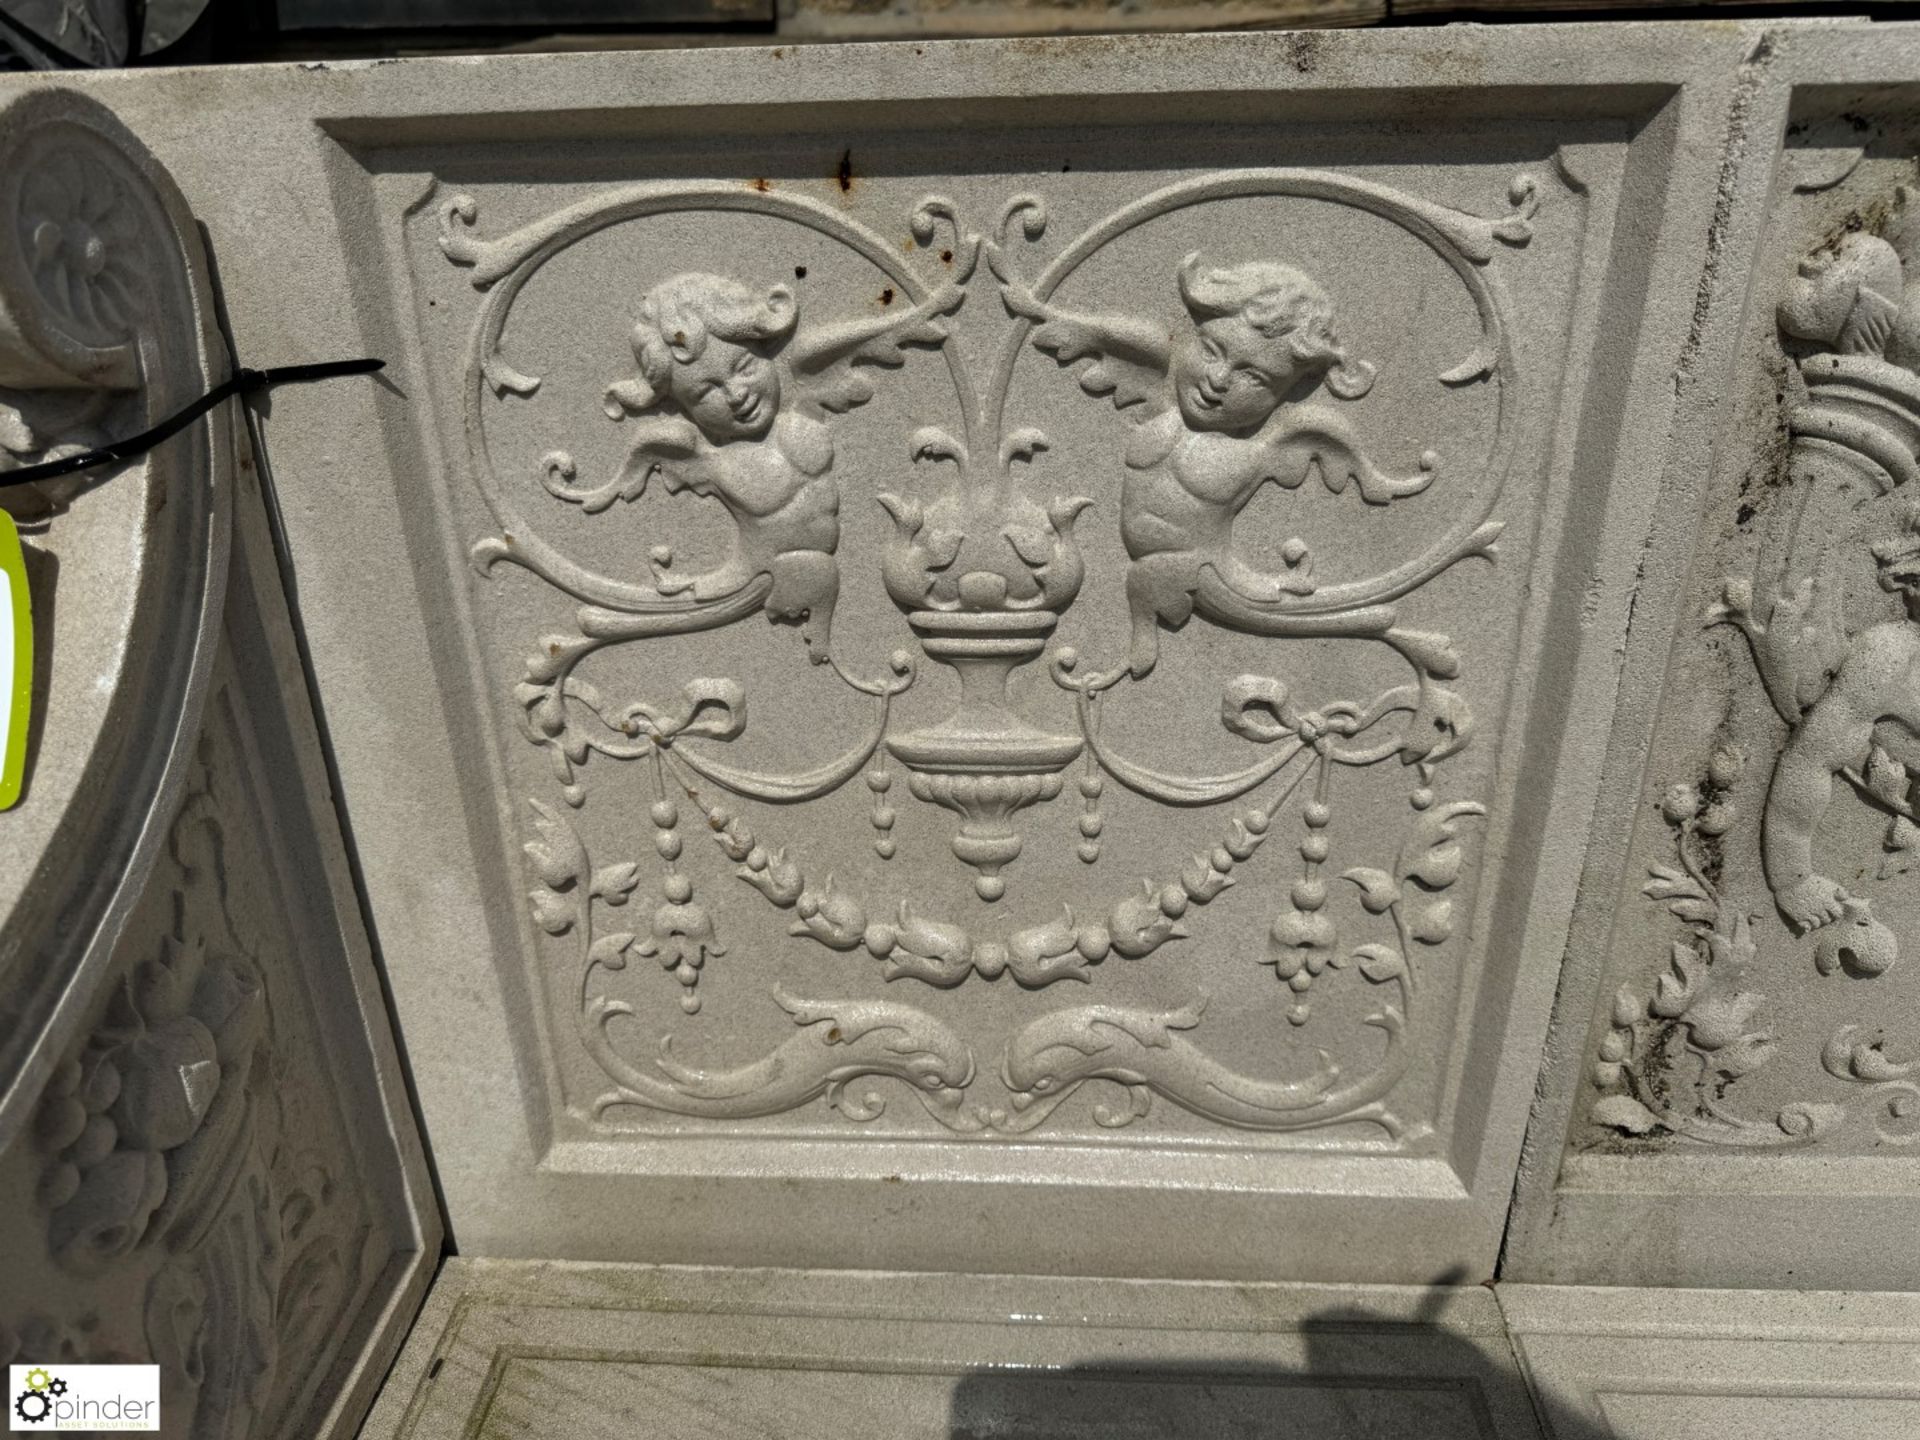 A reconstituted Haddonstone Garden Bench, with classical decoration by Raphael, approx. 40in x 86in - Image 6 of 11